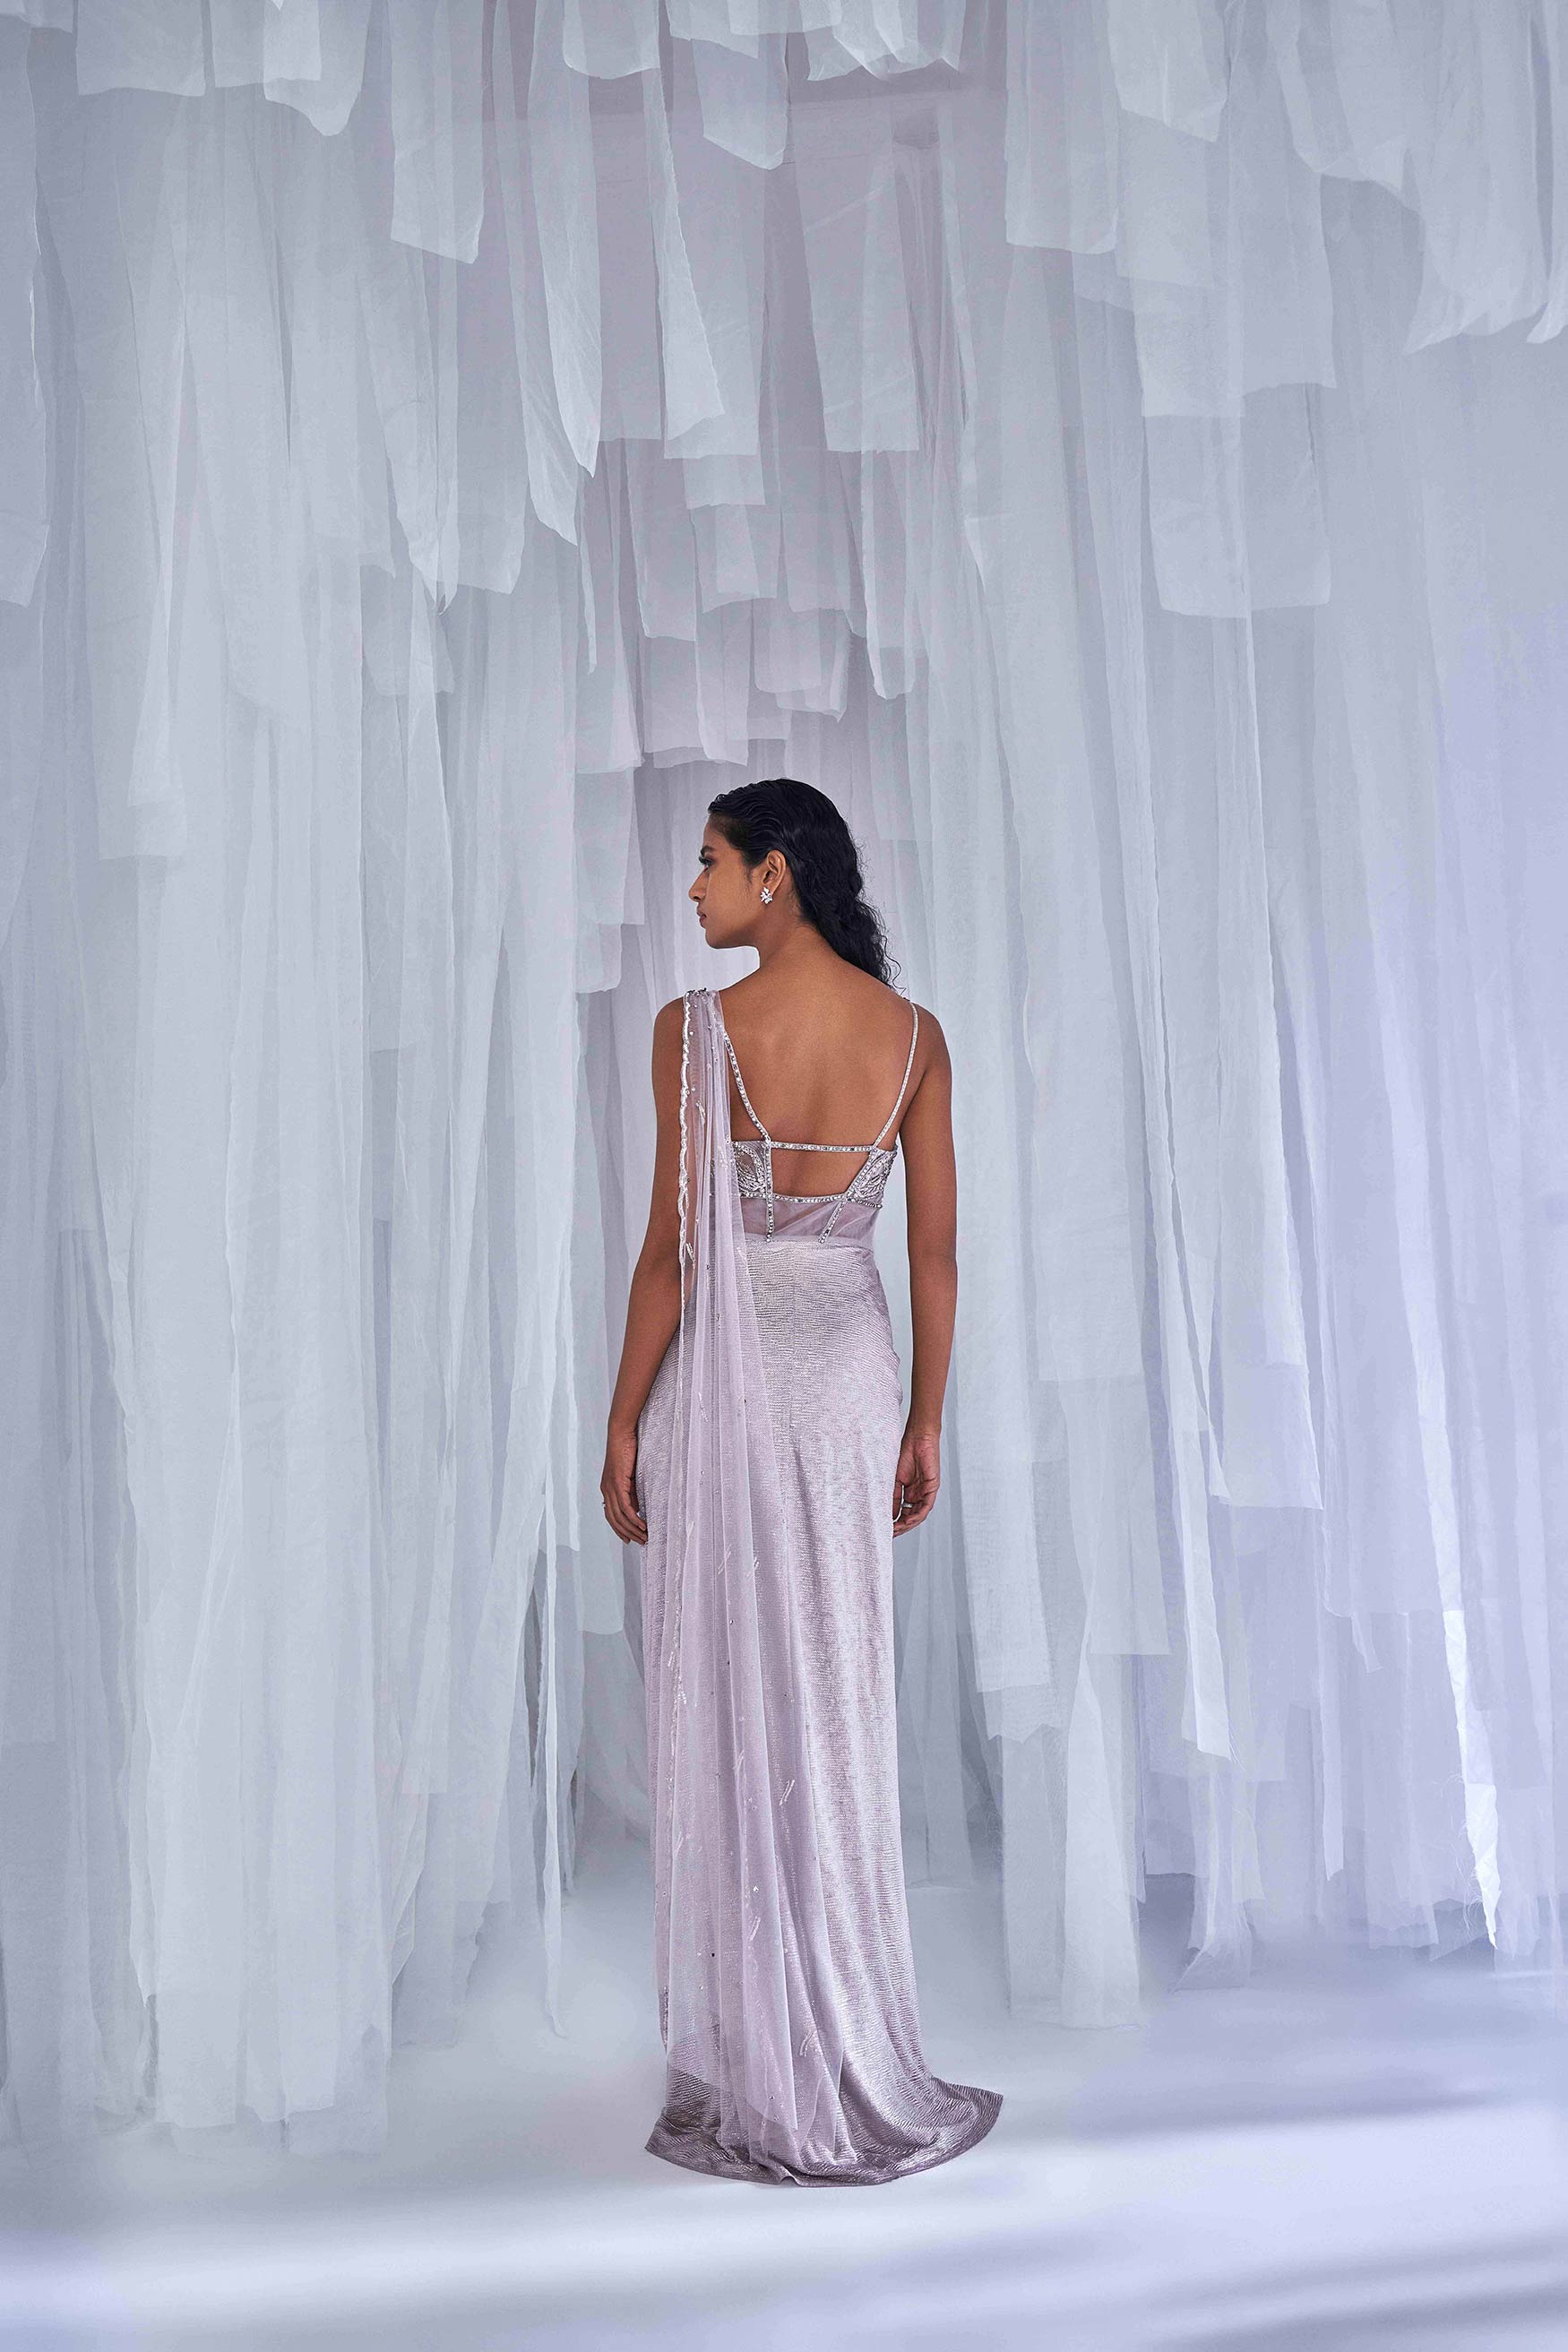 "Mellow Poetry" Drape Gown